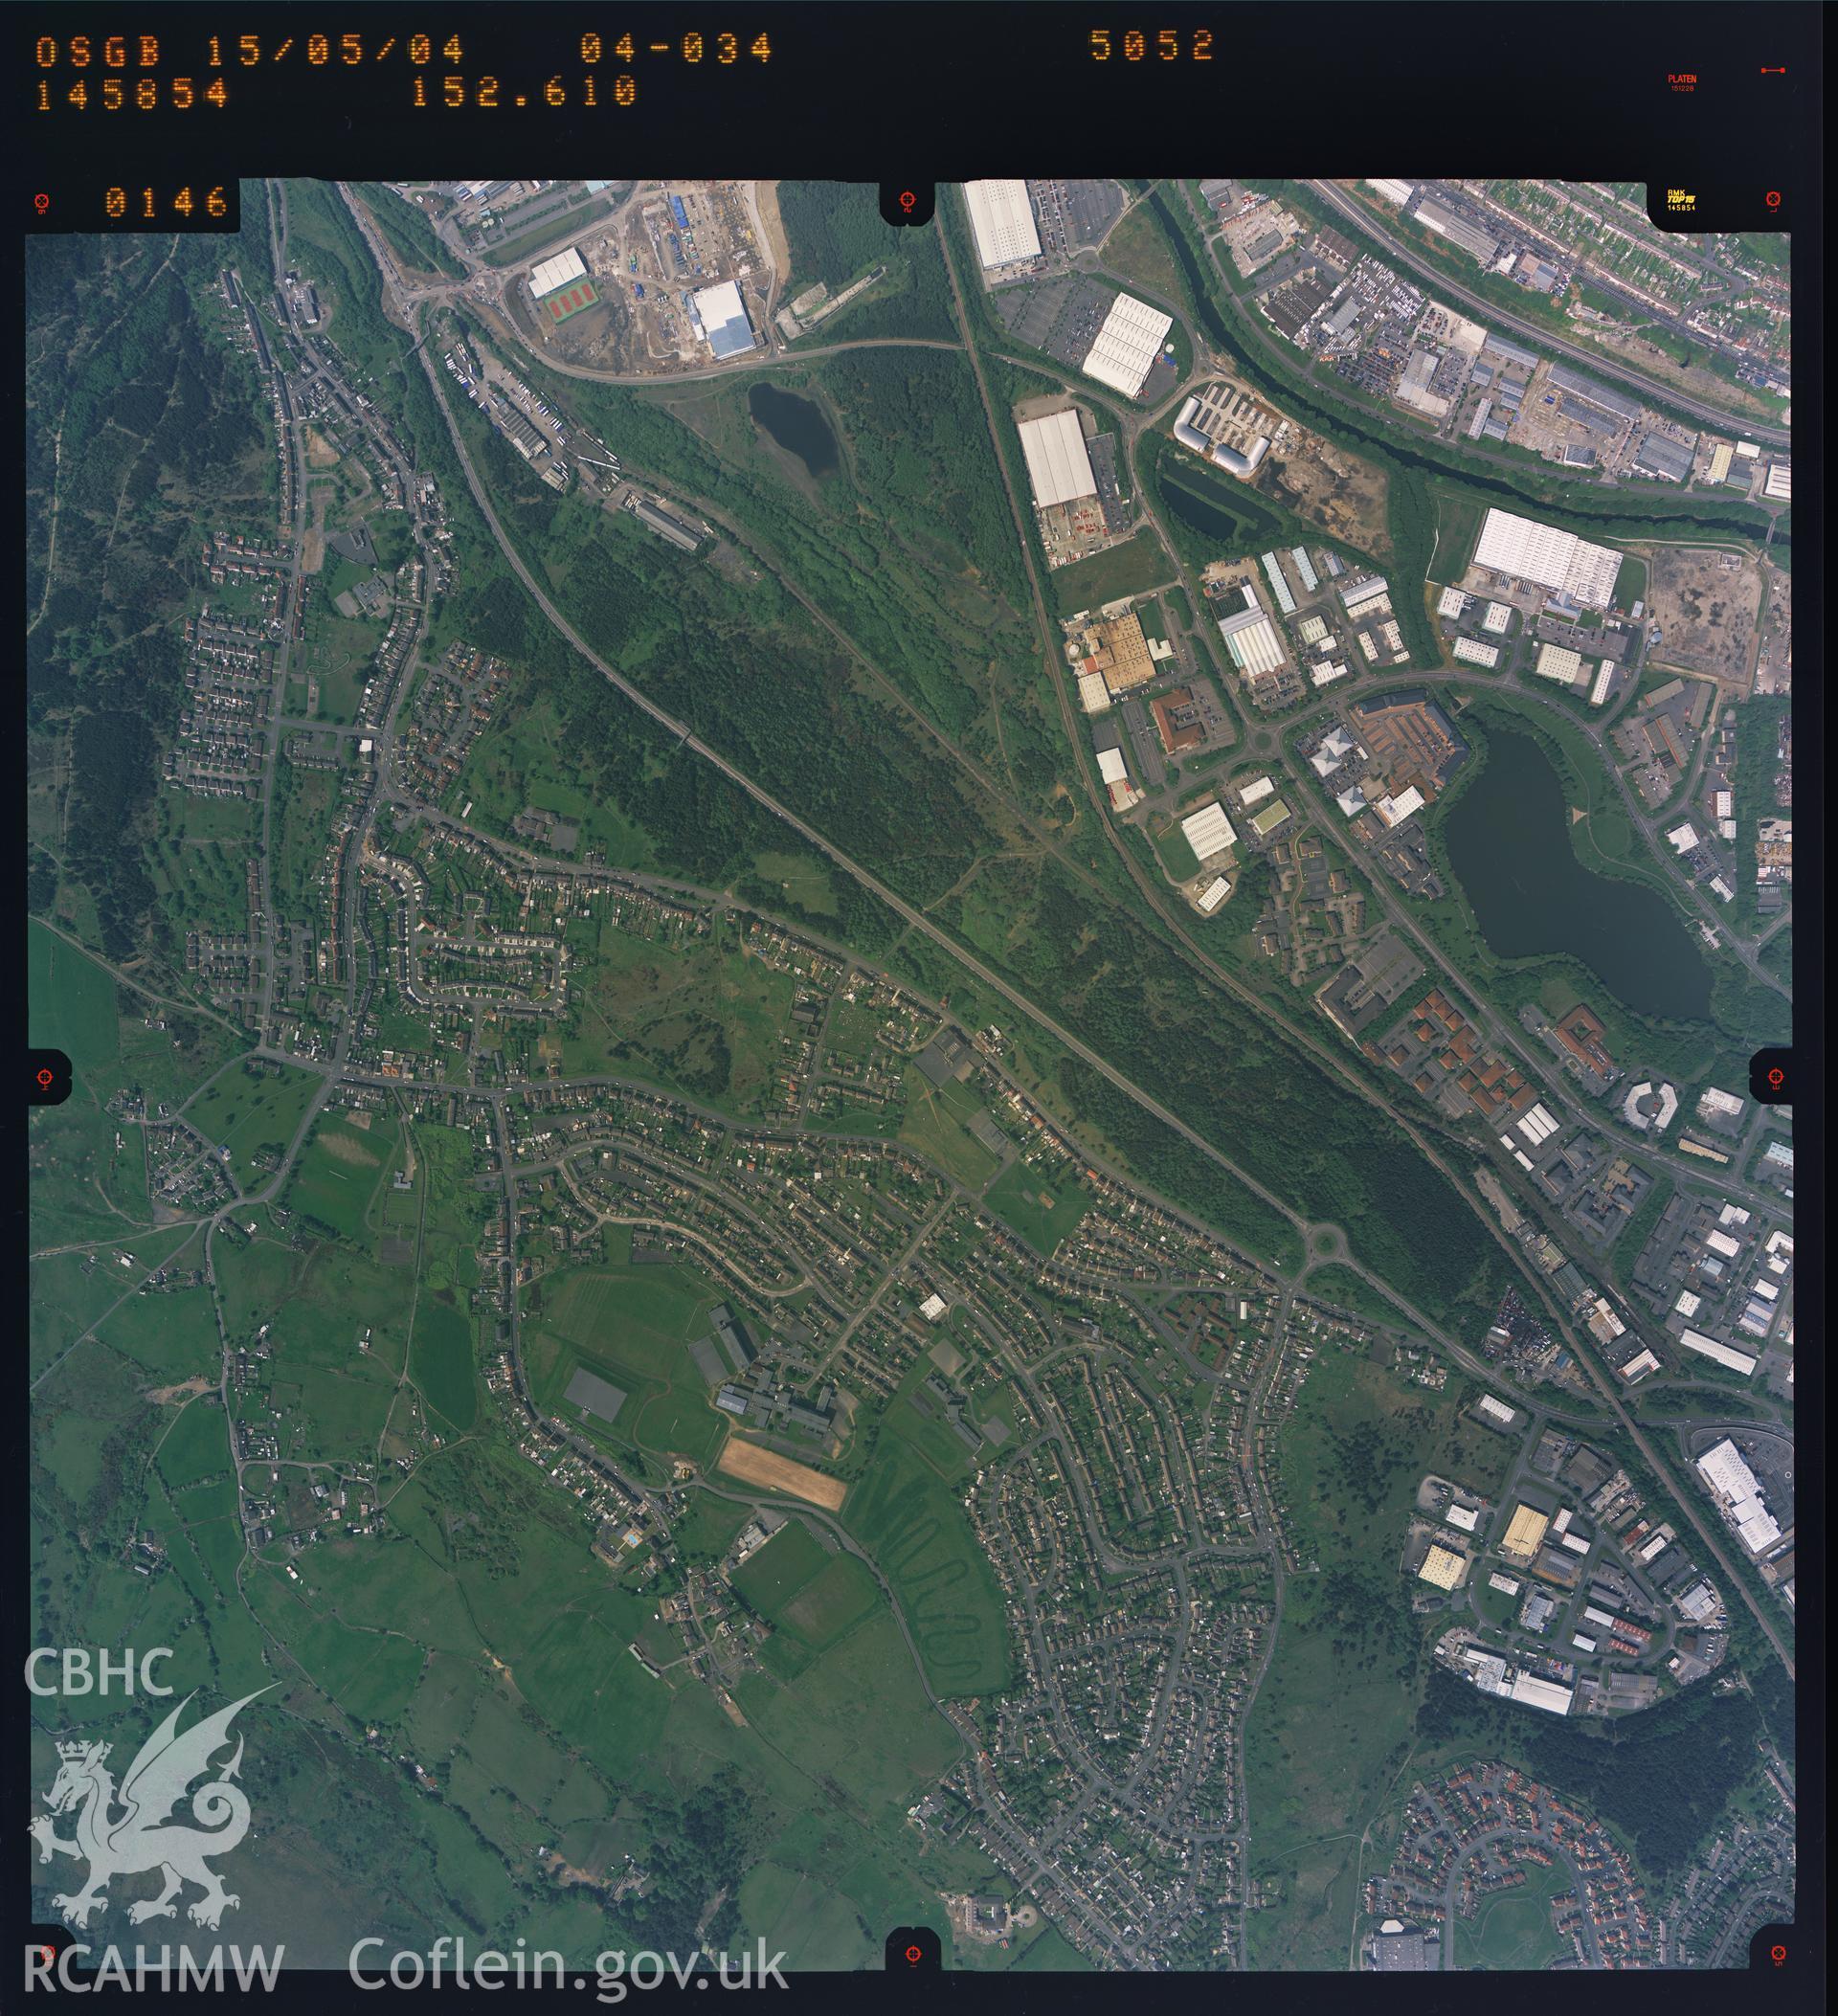 Digitized copy of a colour aerial photograph showing the Winsh-wen area of Swansea, taken by Ordnance Survey, 2004.